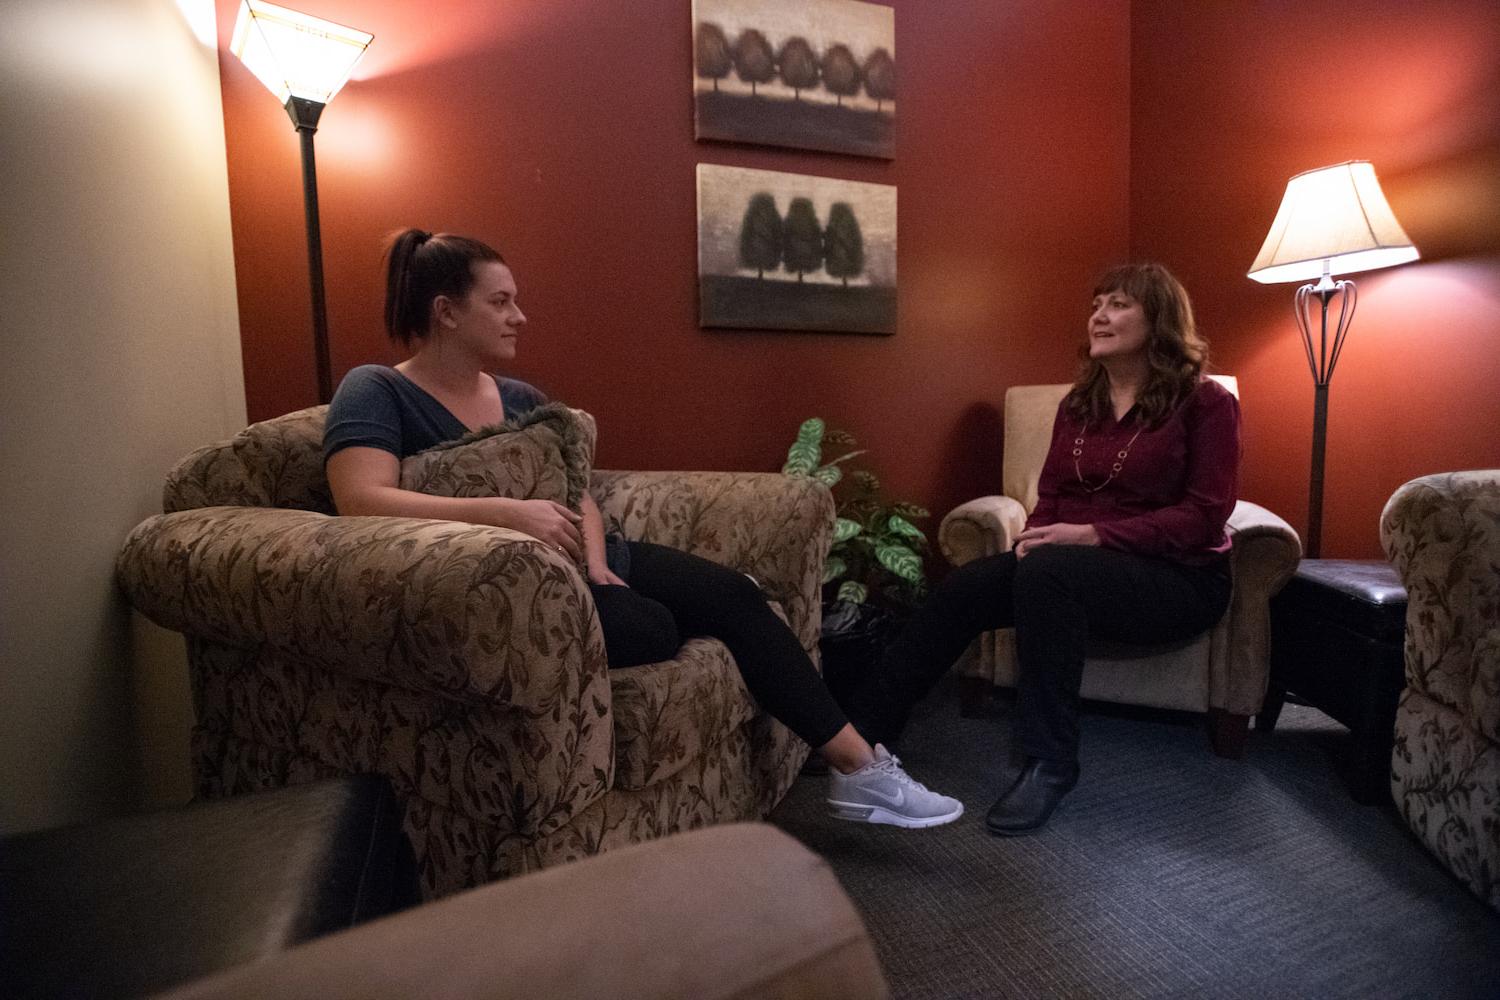 A counselor having a conversation with a woman